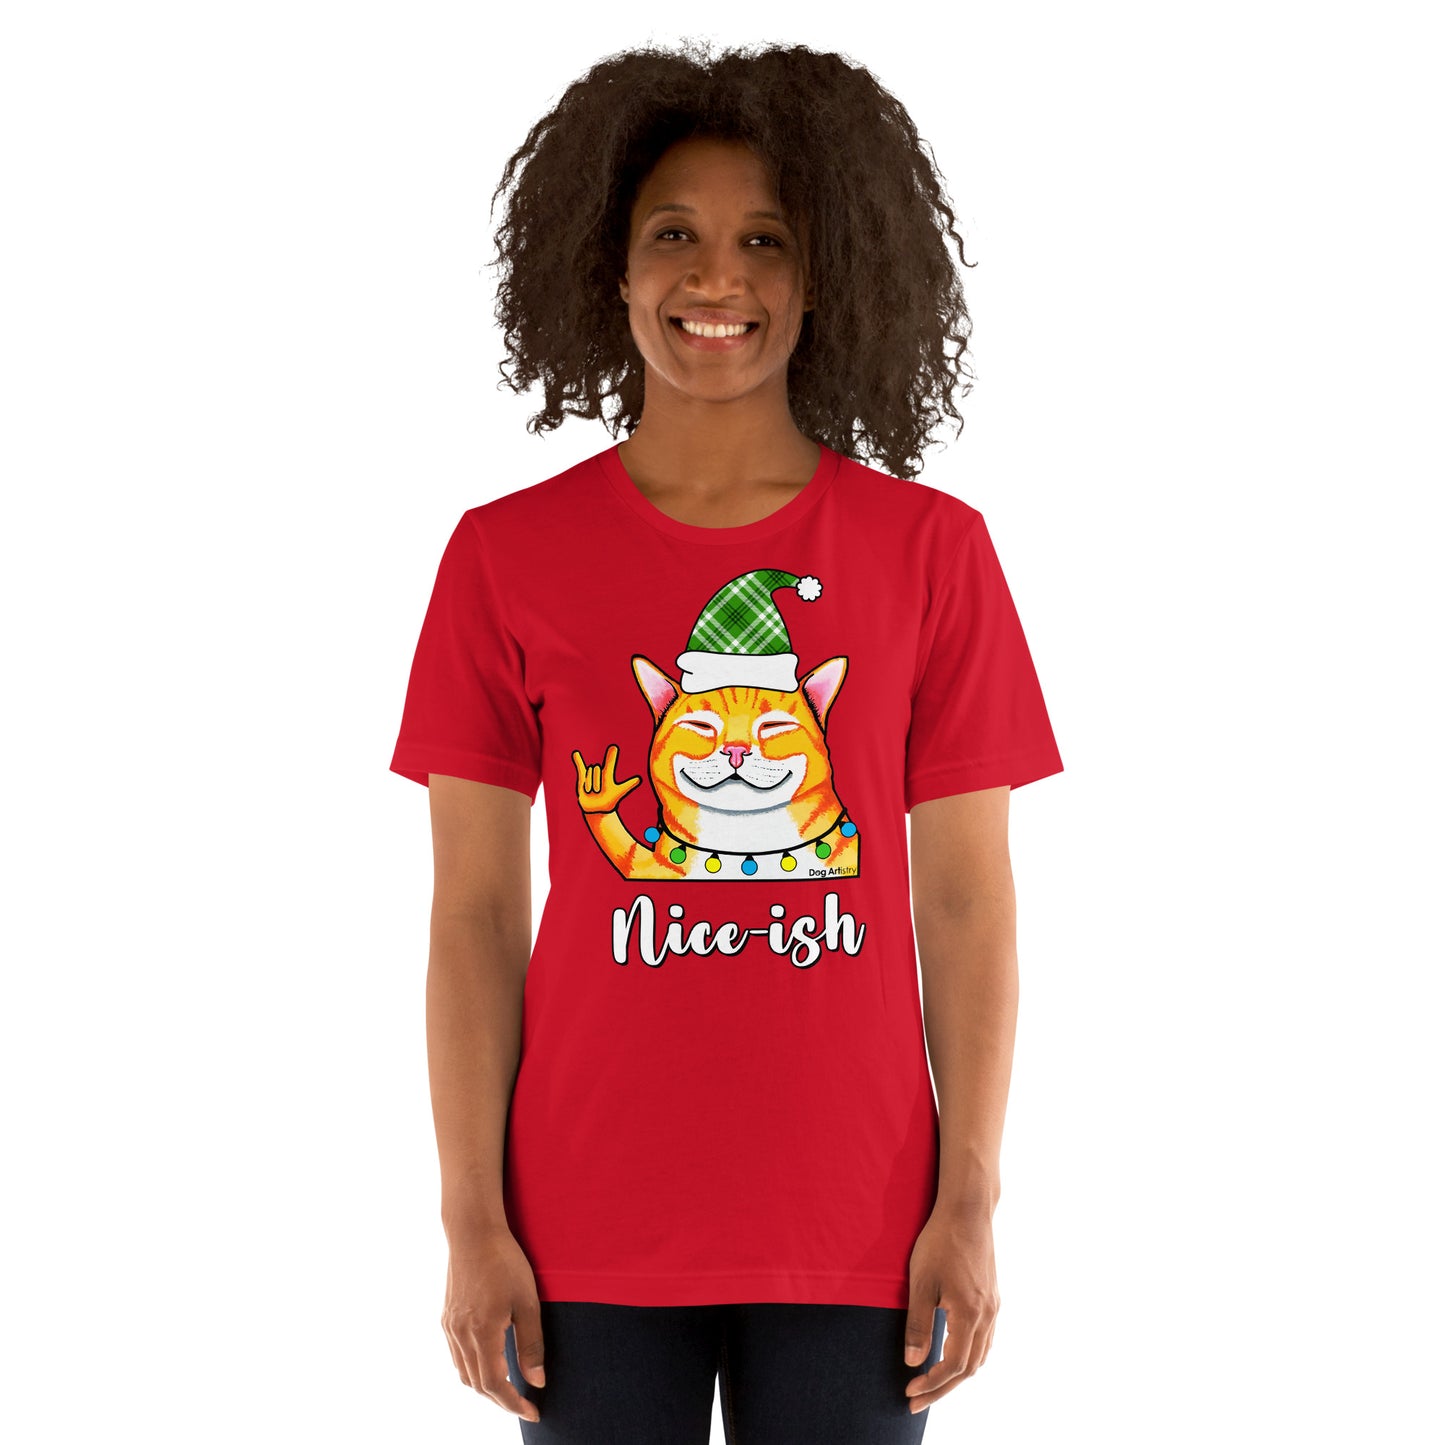 Nice-ish Cat unisex t-shirt red by Dog Artistry.